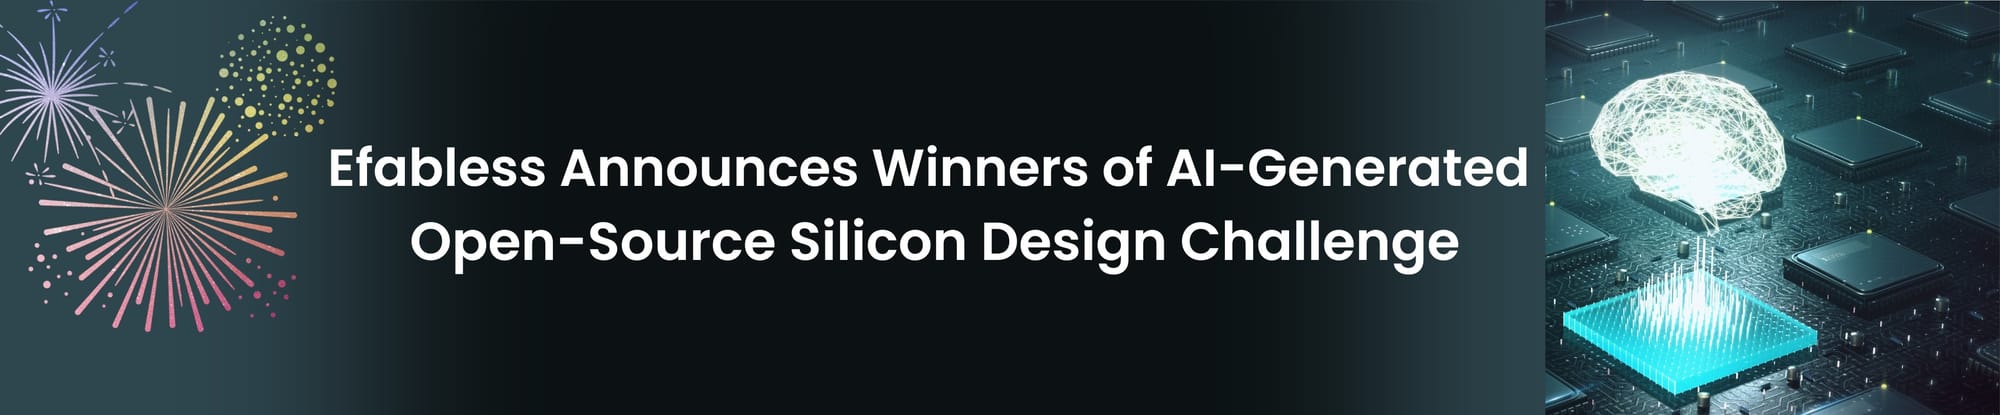 Efabless Awards Winners of AI Silicon Design Contest (3700 × 768 px)_v2.jpg